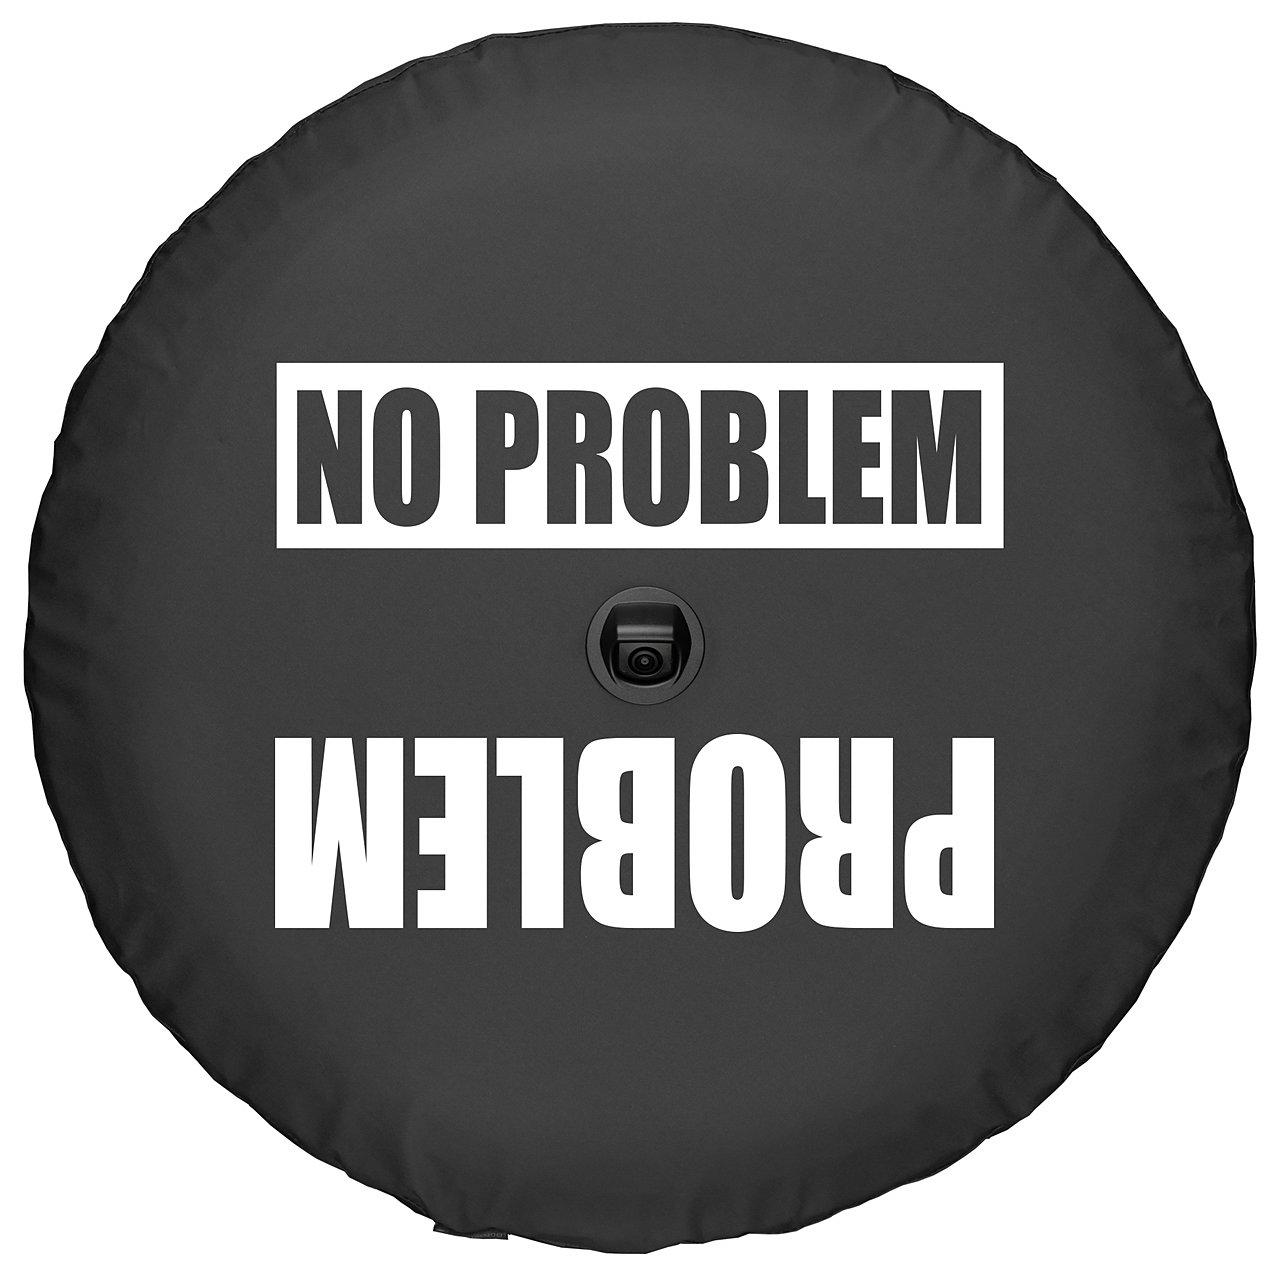 No Problem Slogan Graphic, for T-shirt Prints and Other Uses. Stock Vector - Illustration of ...